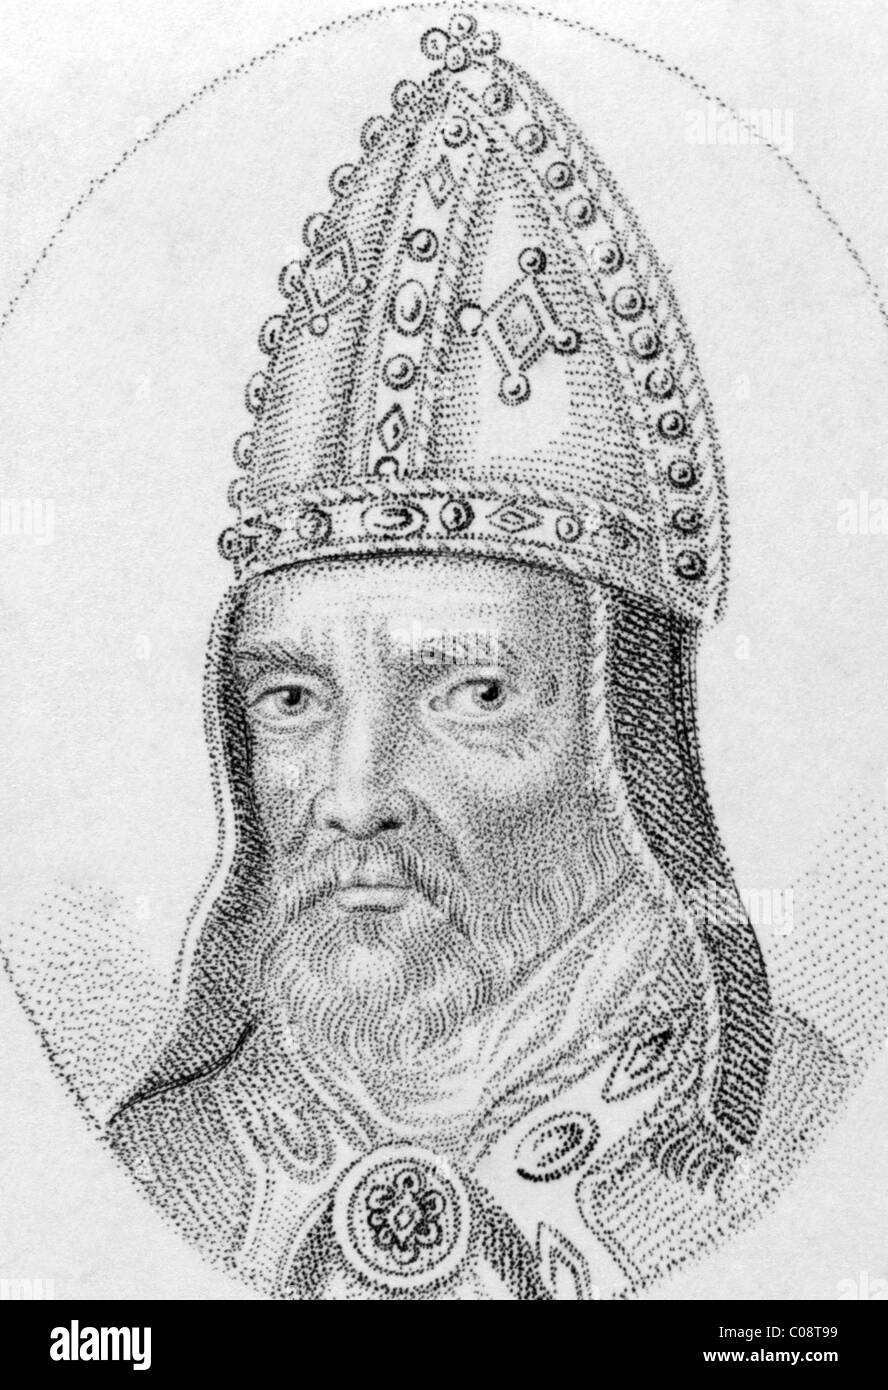 Stock Photo - William Bateman on engraving from the 1800s. Medieval Bishop of Norwich during 1344-1355 - william-bateman-on-engraving-from-the-1800s-medieval-bishop-of-norwich-C08T99